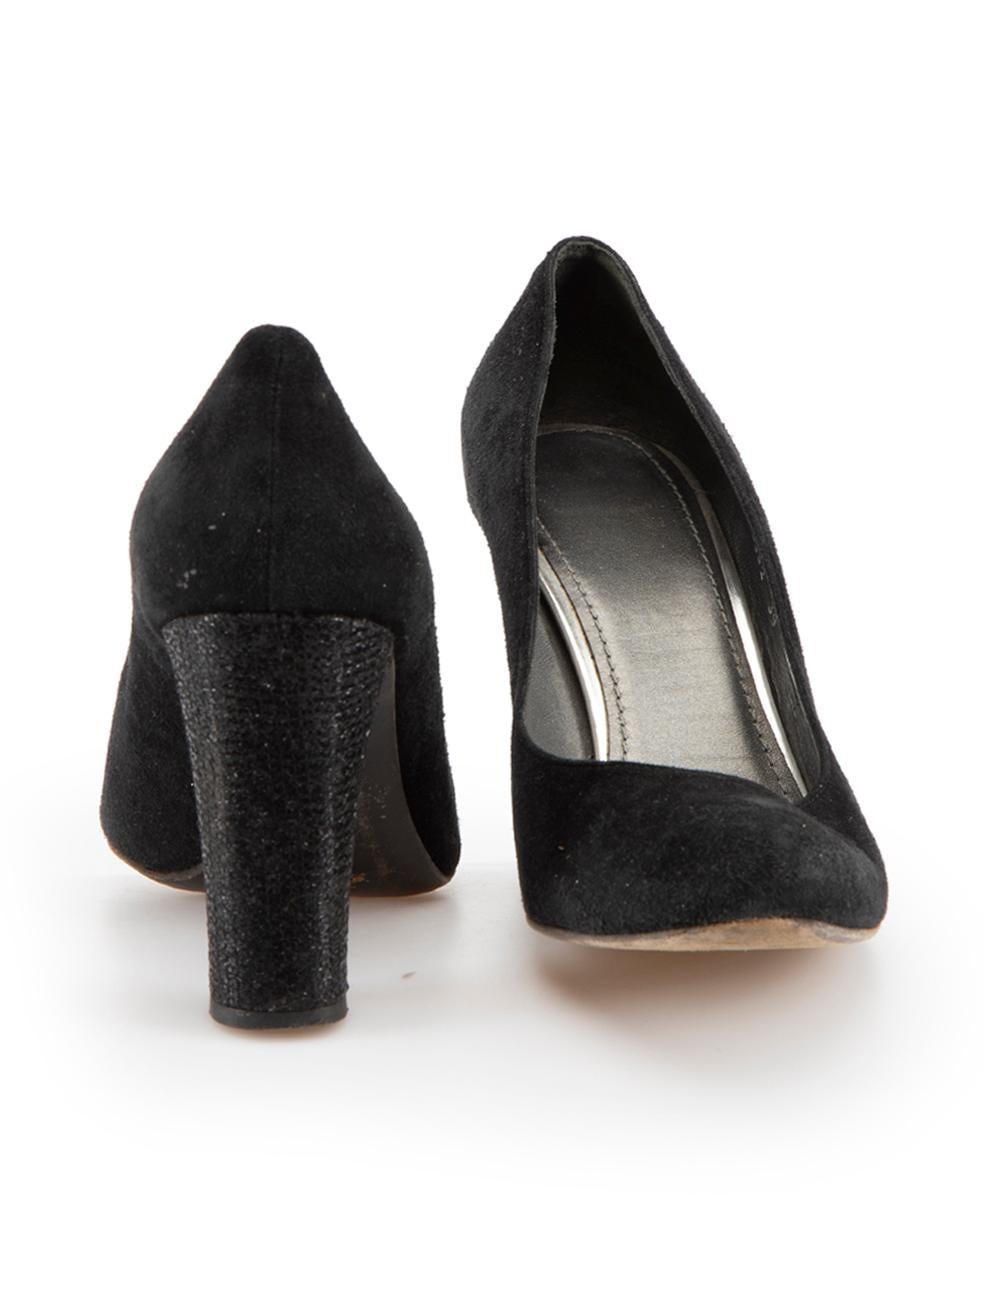 Black Suede Glitter Heel Pumps Size IT 39 In Good Condition For Sale In London, GB